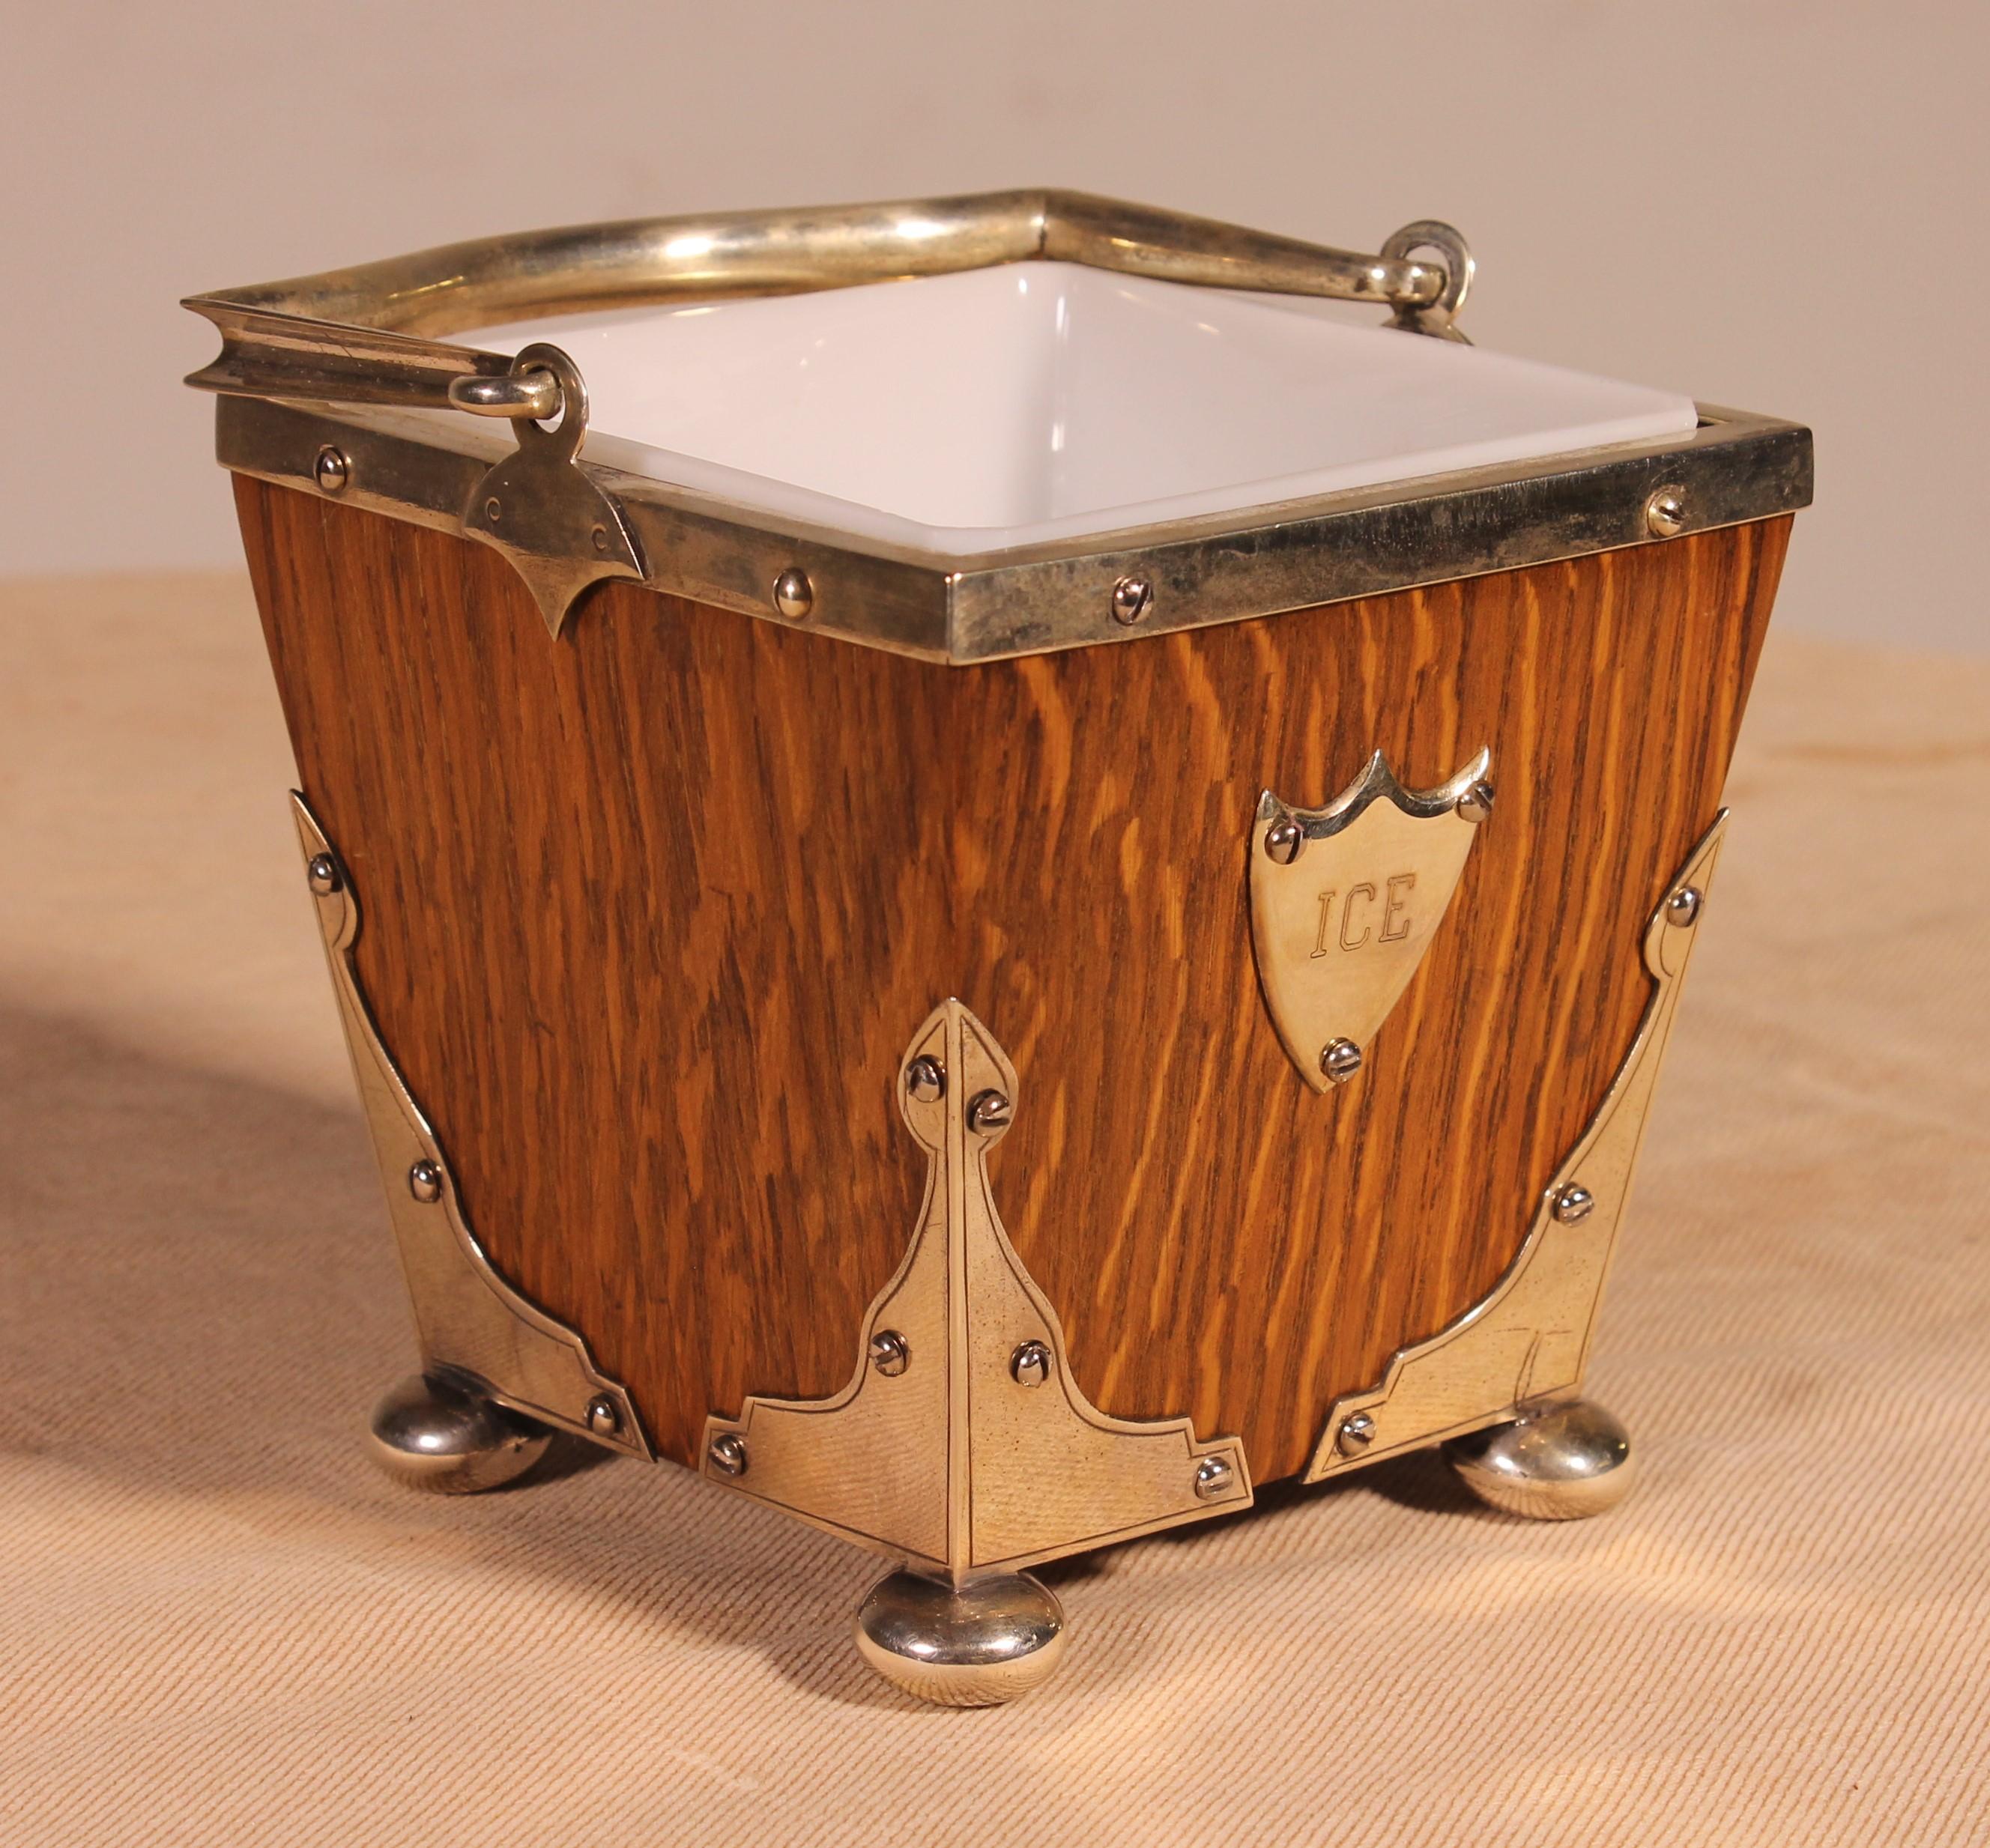 lovely little ice bucket in oak and silver metal from the 19th century from England

Lovely object with its porcelain container

Very beautiful square model of good quality with its very decorative silver metal

In superb condition and beautiful